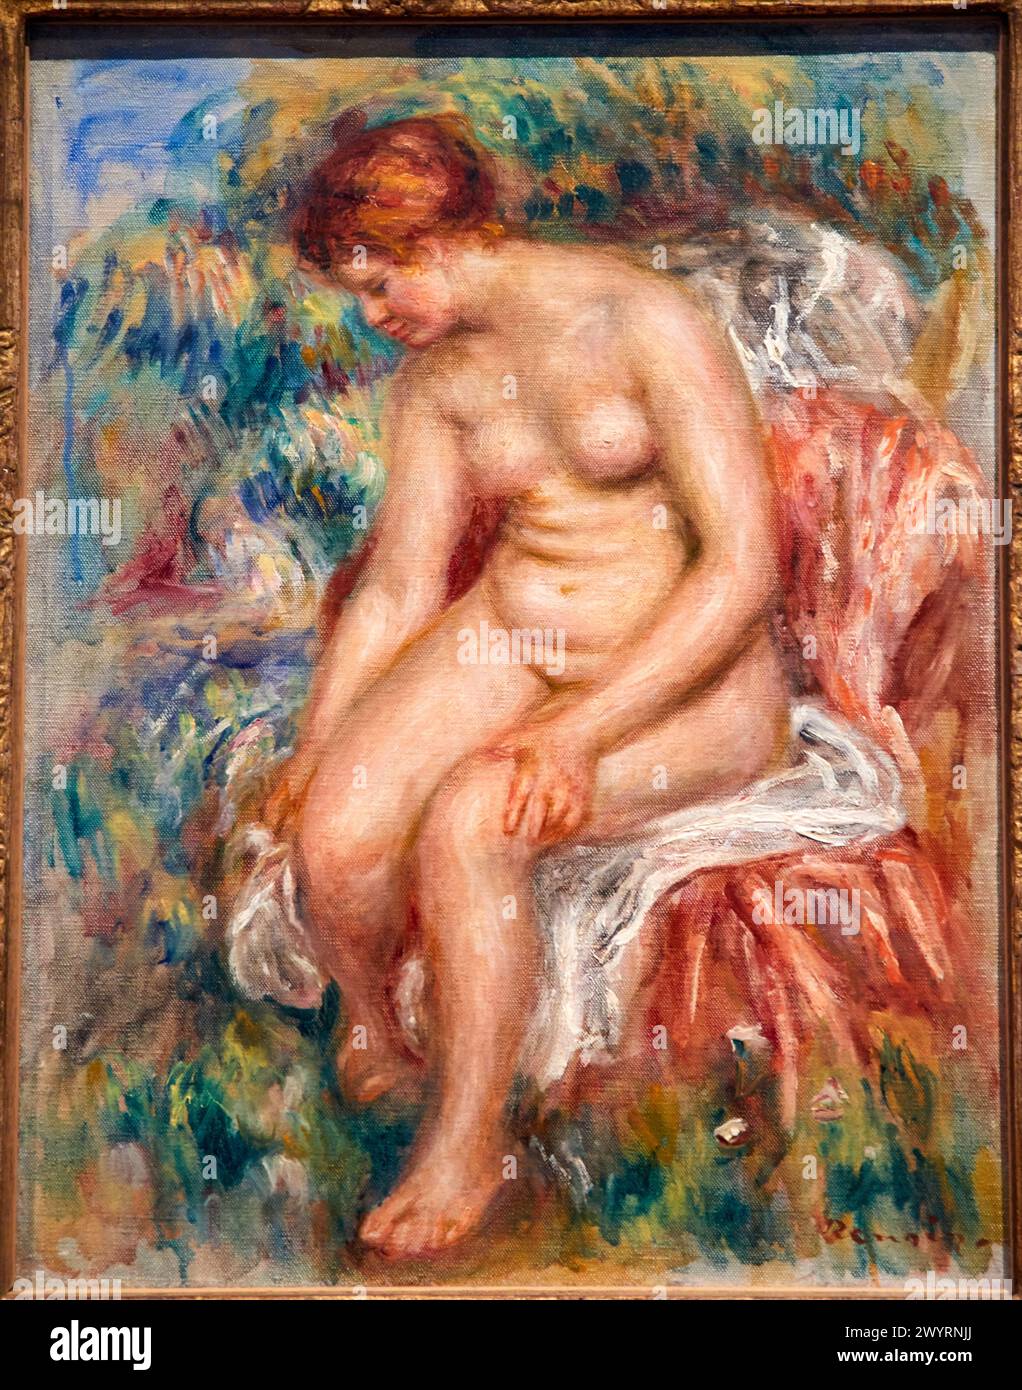 Baigneuse assise S'essuyant une jambe, 1914, Pierre Auguste Renoir, Musée d'Art moderne, Troyes, regione Champagne-Ardenne, dipartimento Aube, Francia, UE Foto Stock